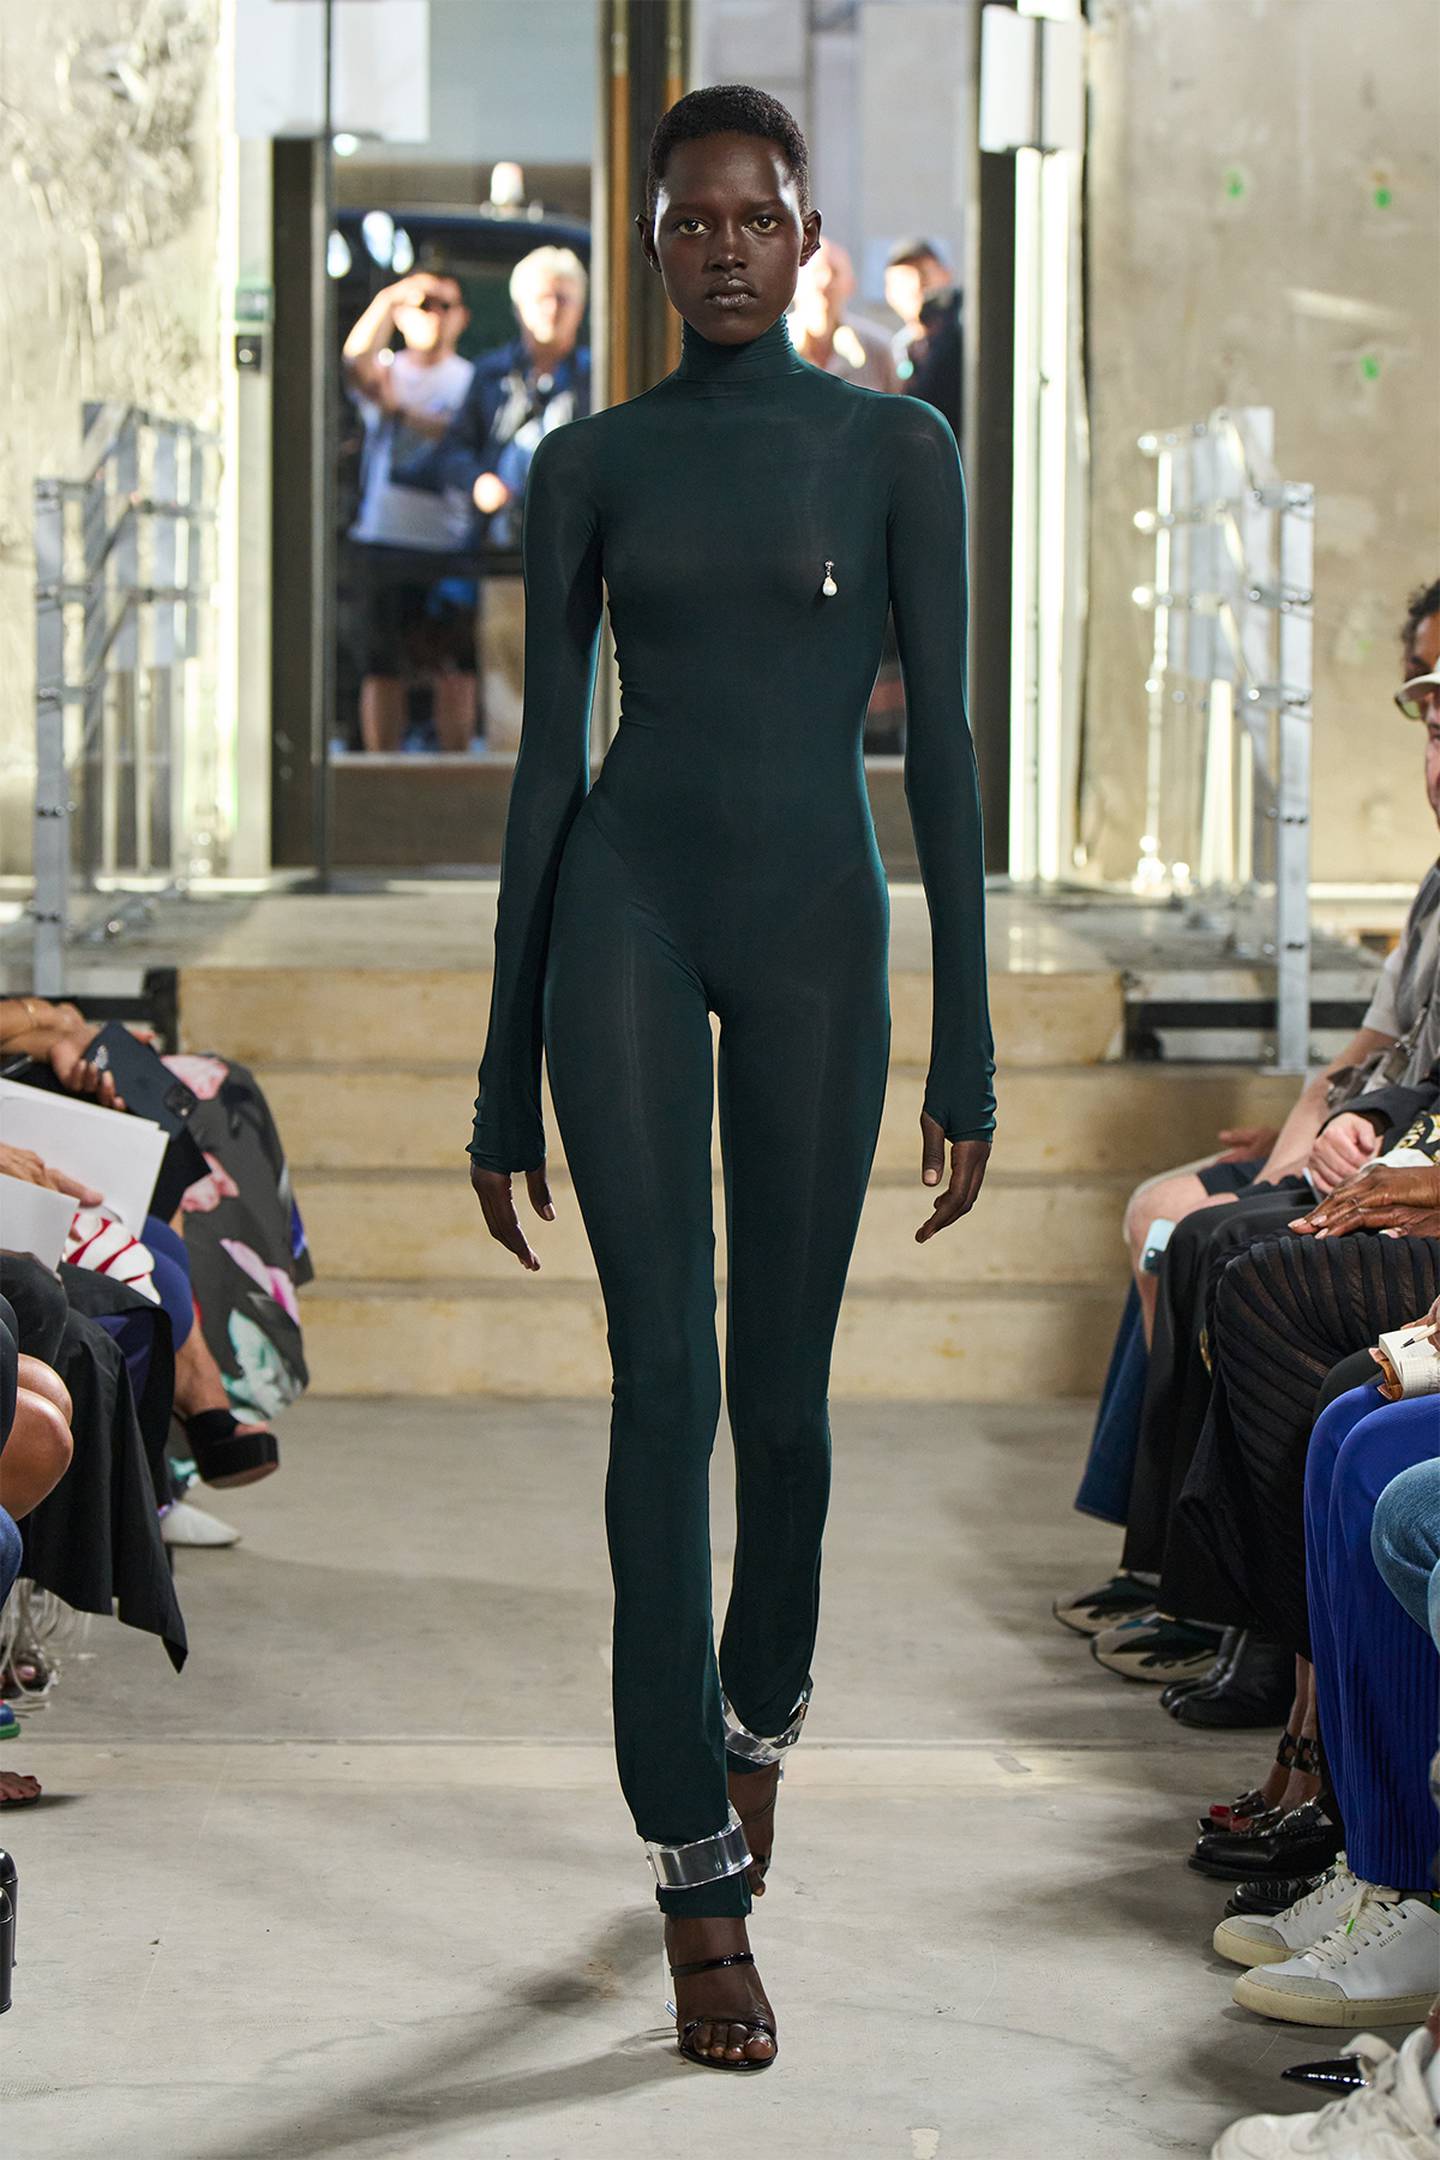 A model wears a dark green emerald catsuit with black heeled shoes.